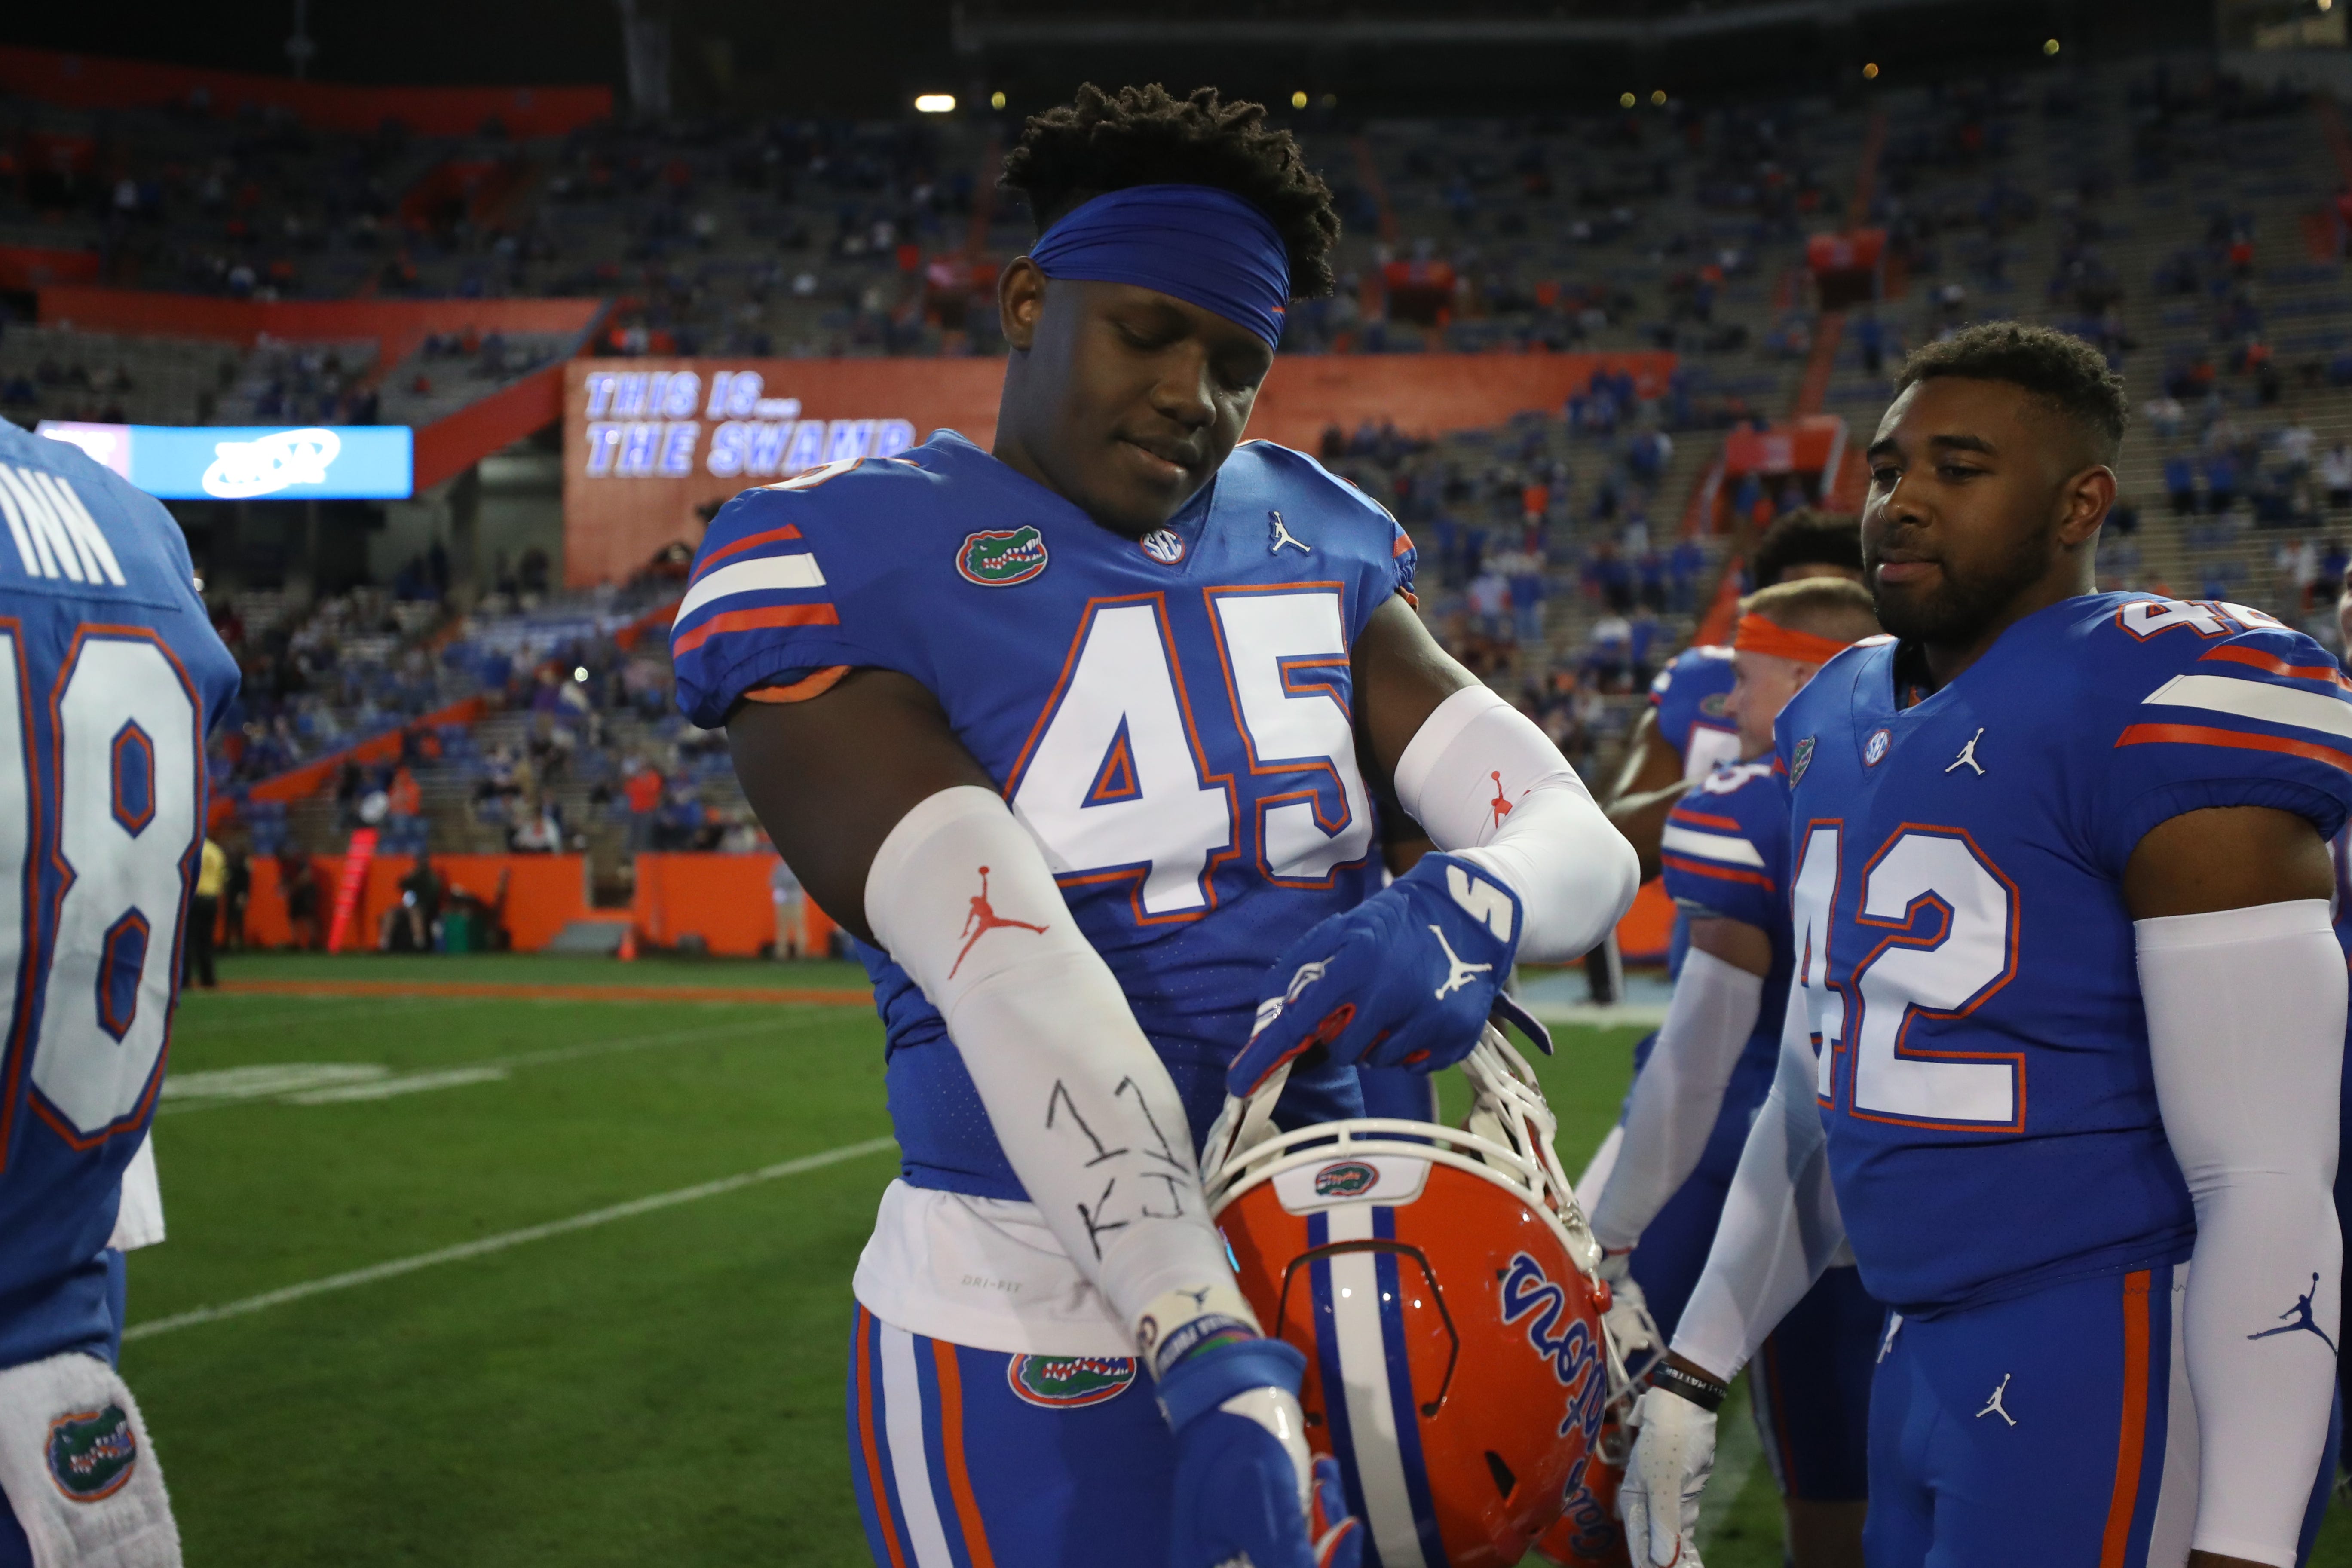 Florida senior tight end Clifford Taylor IV shows a tribute to Gators basketball player Keyontae Johnson during the Gators' game against the LSU Tigers on Saturday, December 12, 2020 at Ben Hill Griffin Stadium in Gainesville, Fla.